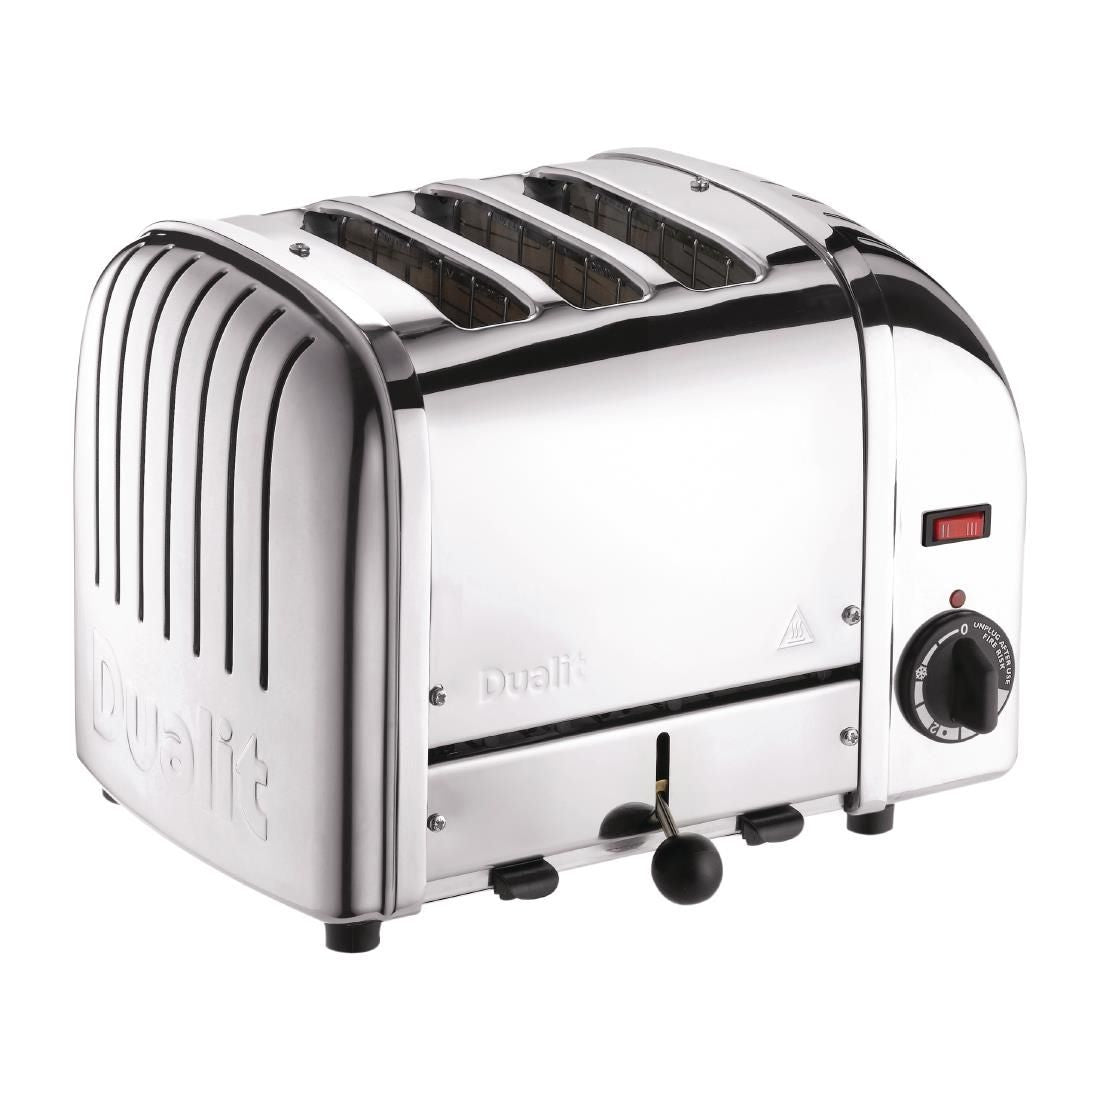 Dualit 3 Slice Vario Toaster Polished 30084 JD Catering Equipment Solutions Ltd